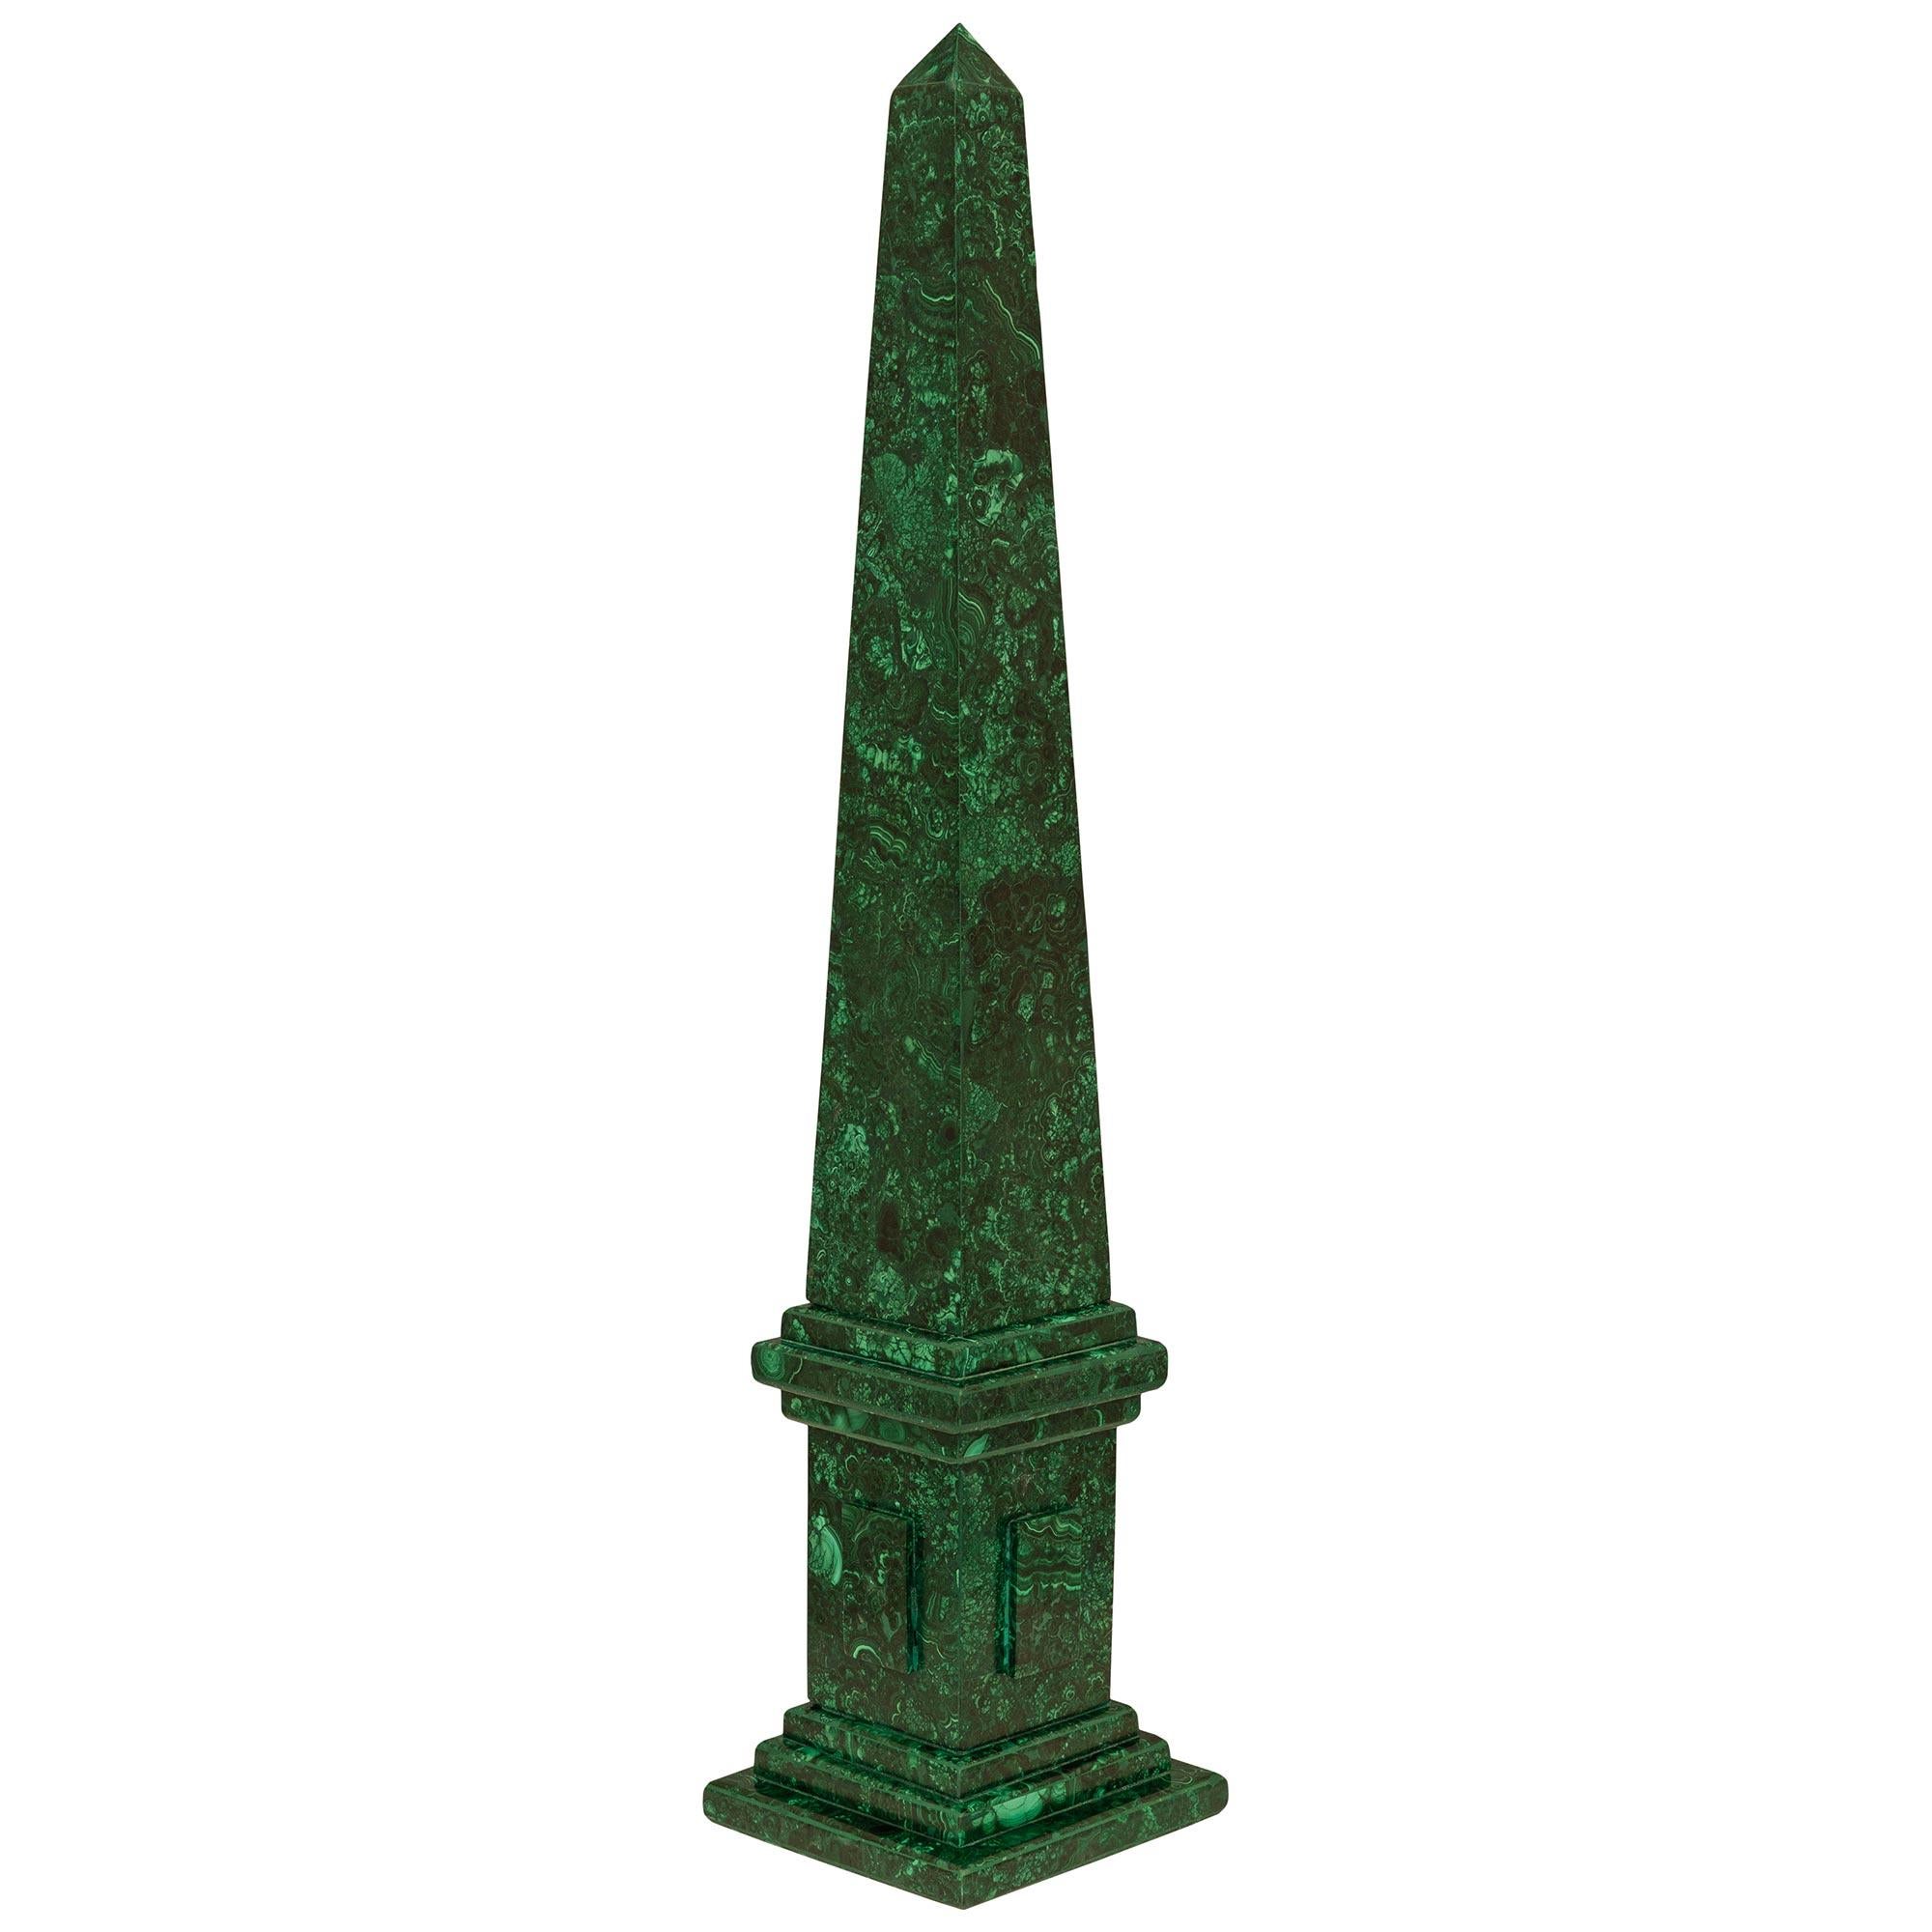 An impressive and very decorative pair of Continental 19th century Malachite obelisks. Each obelisk is raised on a square base with a mottled border. The Malachite stepped base supports the square plinth with raised panels leading up to the solid